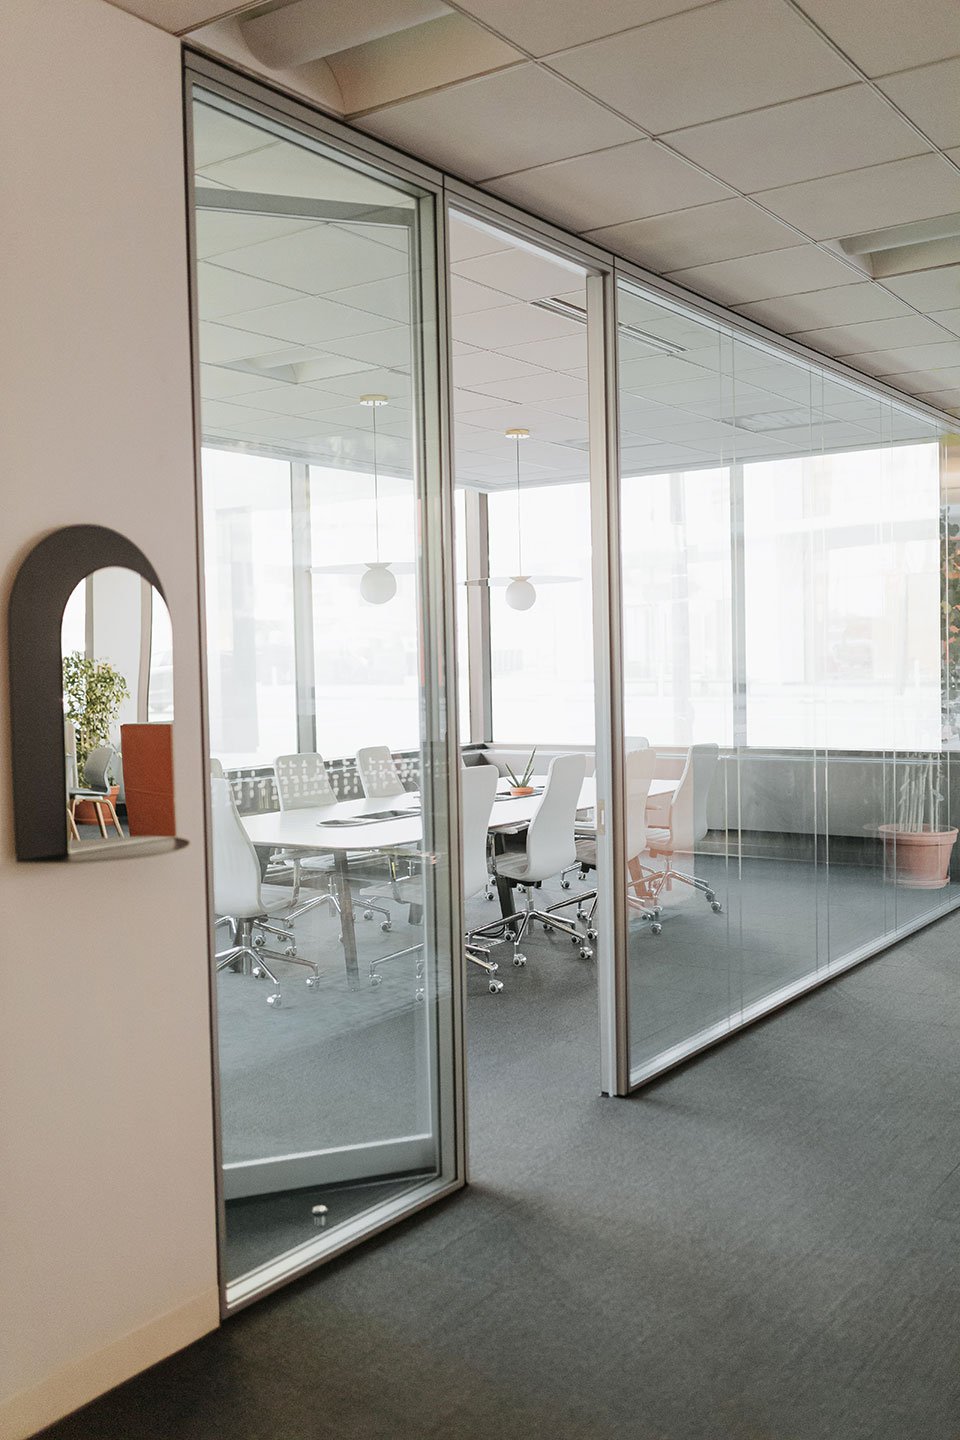 Haworth Enclose Frameless Glass Wall for private meeting room with white desk and white chairs